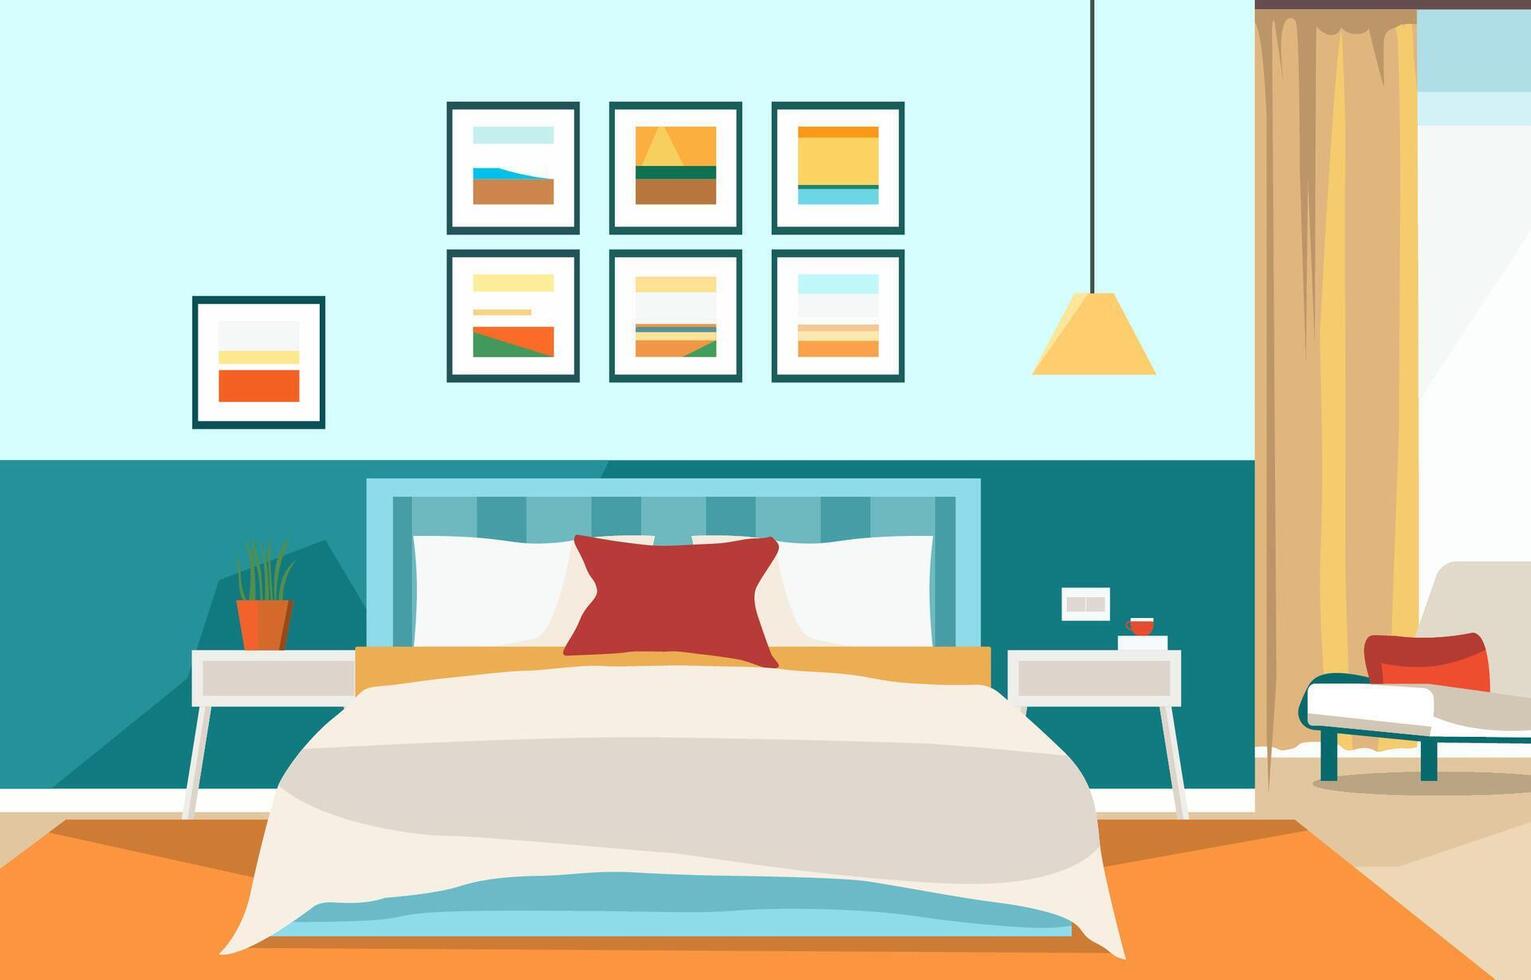 Flat Design of Bedroom Interior with Bed Furniture and Window in Home vector